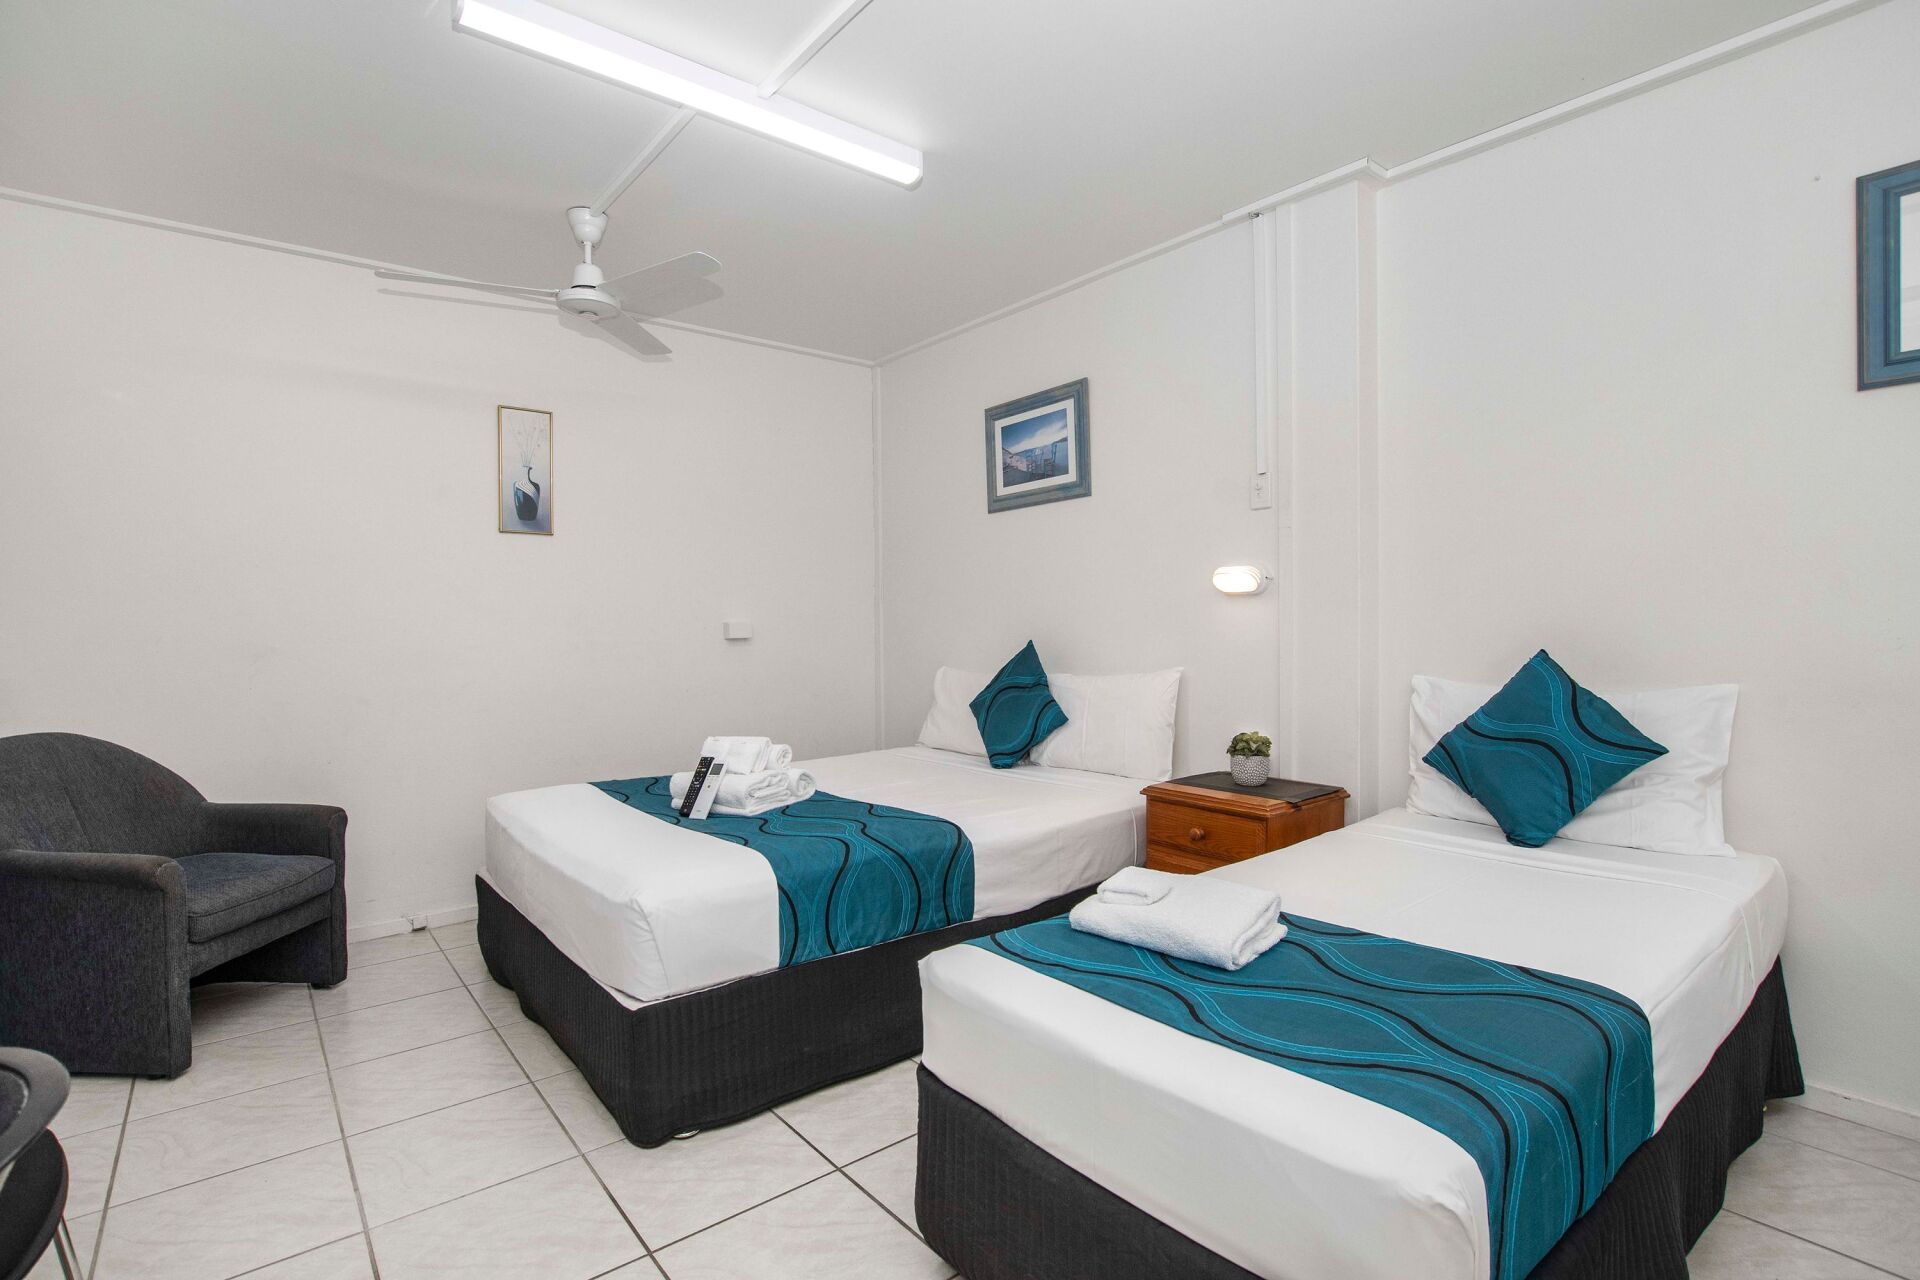 Two Beds in Motel Room — Strand Motel in Townsville, QLD